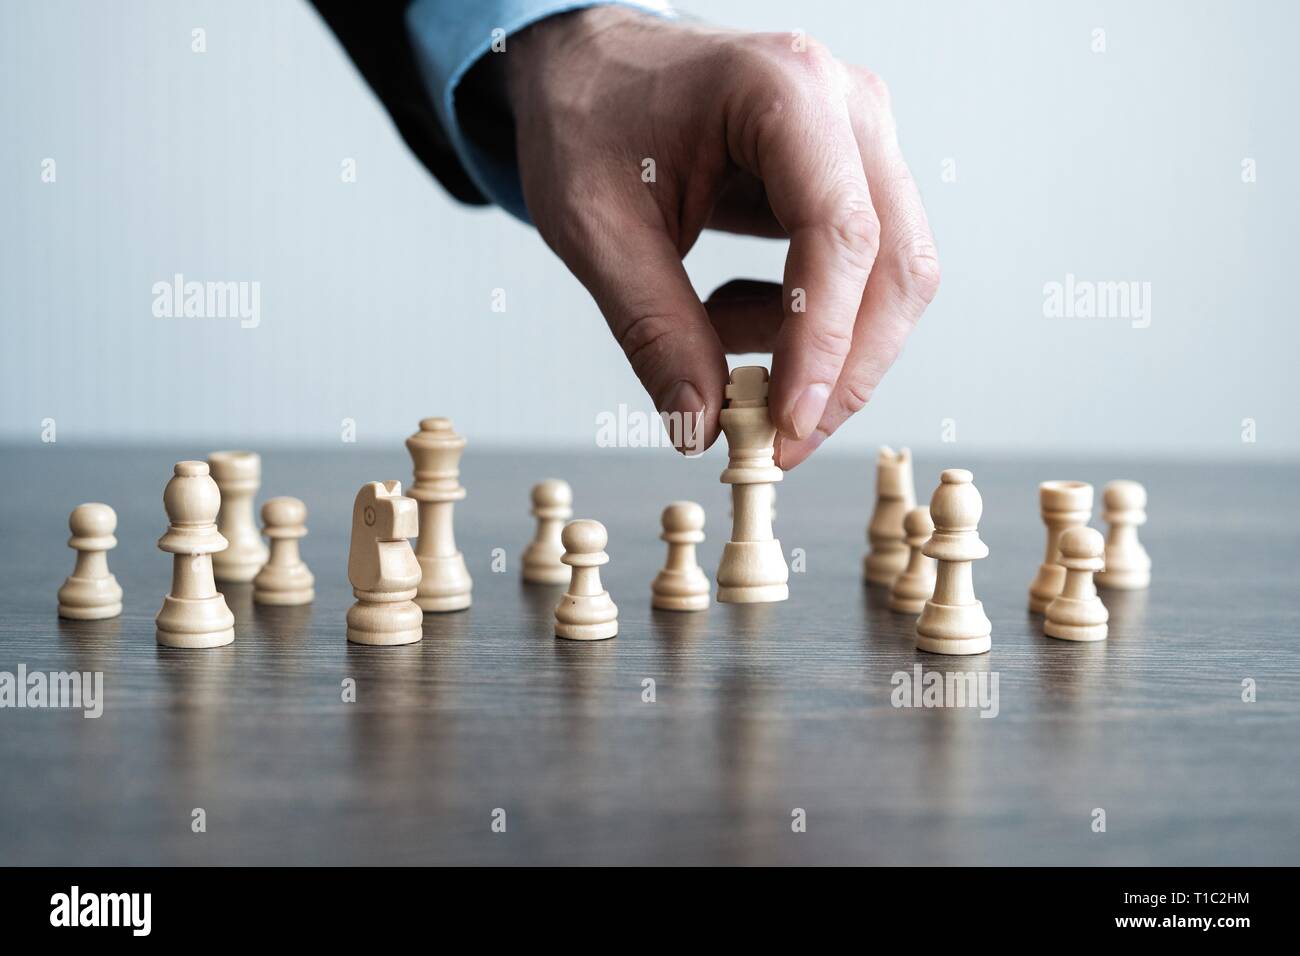 A skilled hand deftly slides a chess piece marked Chess across